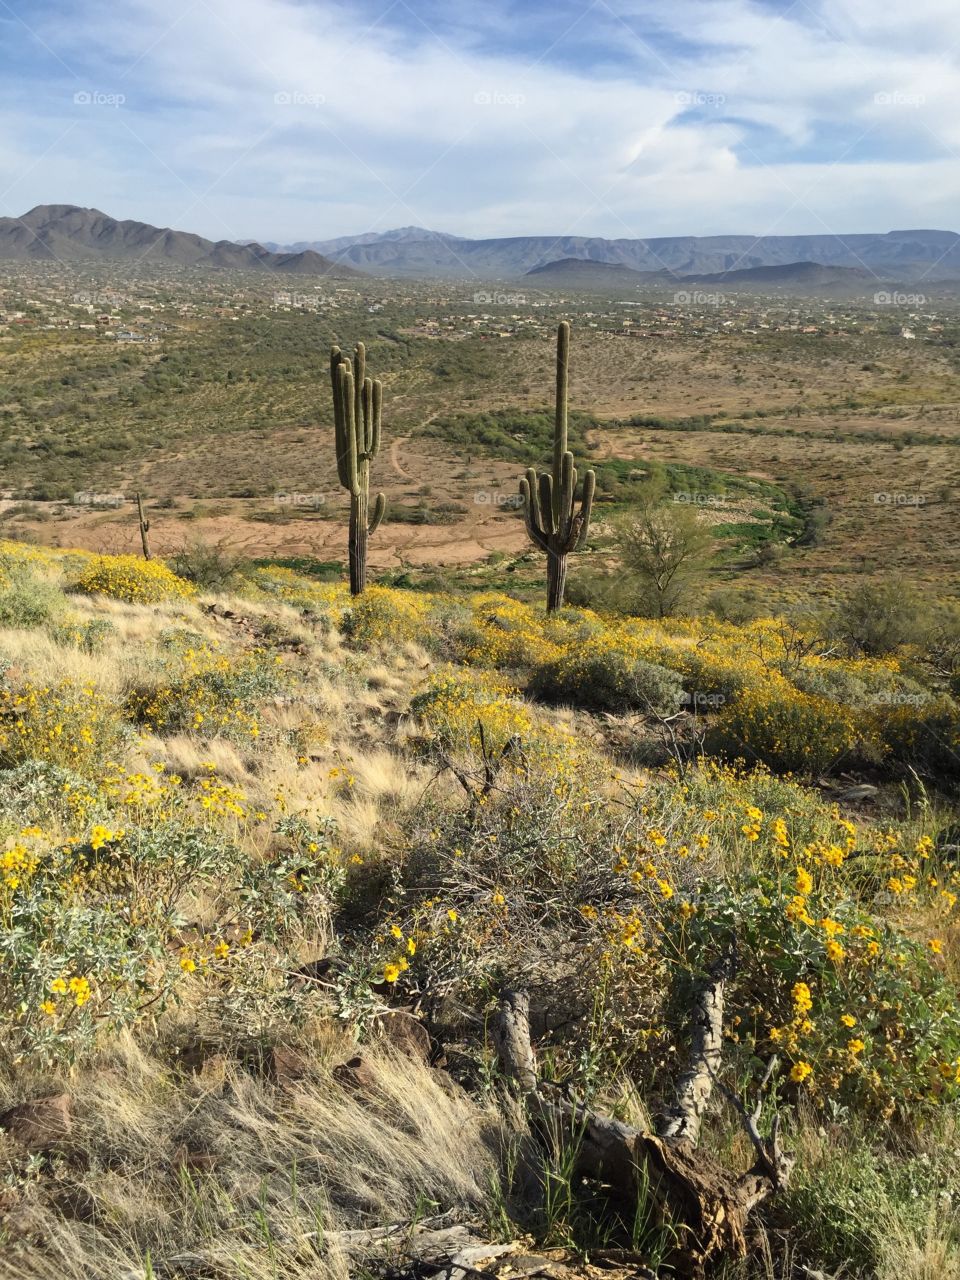 Desert hillside with wild flowers blooming and Saguaro cactus.